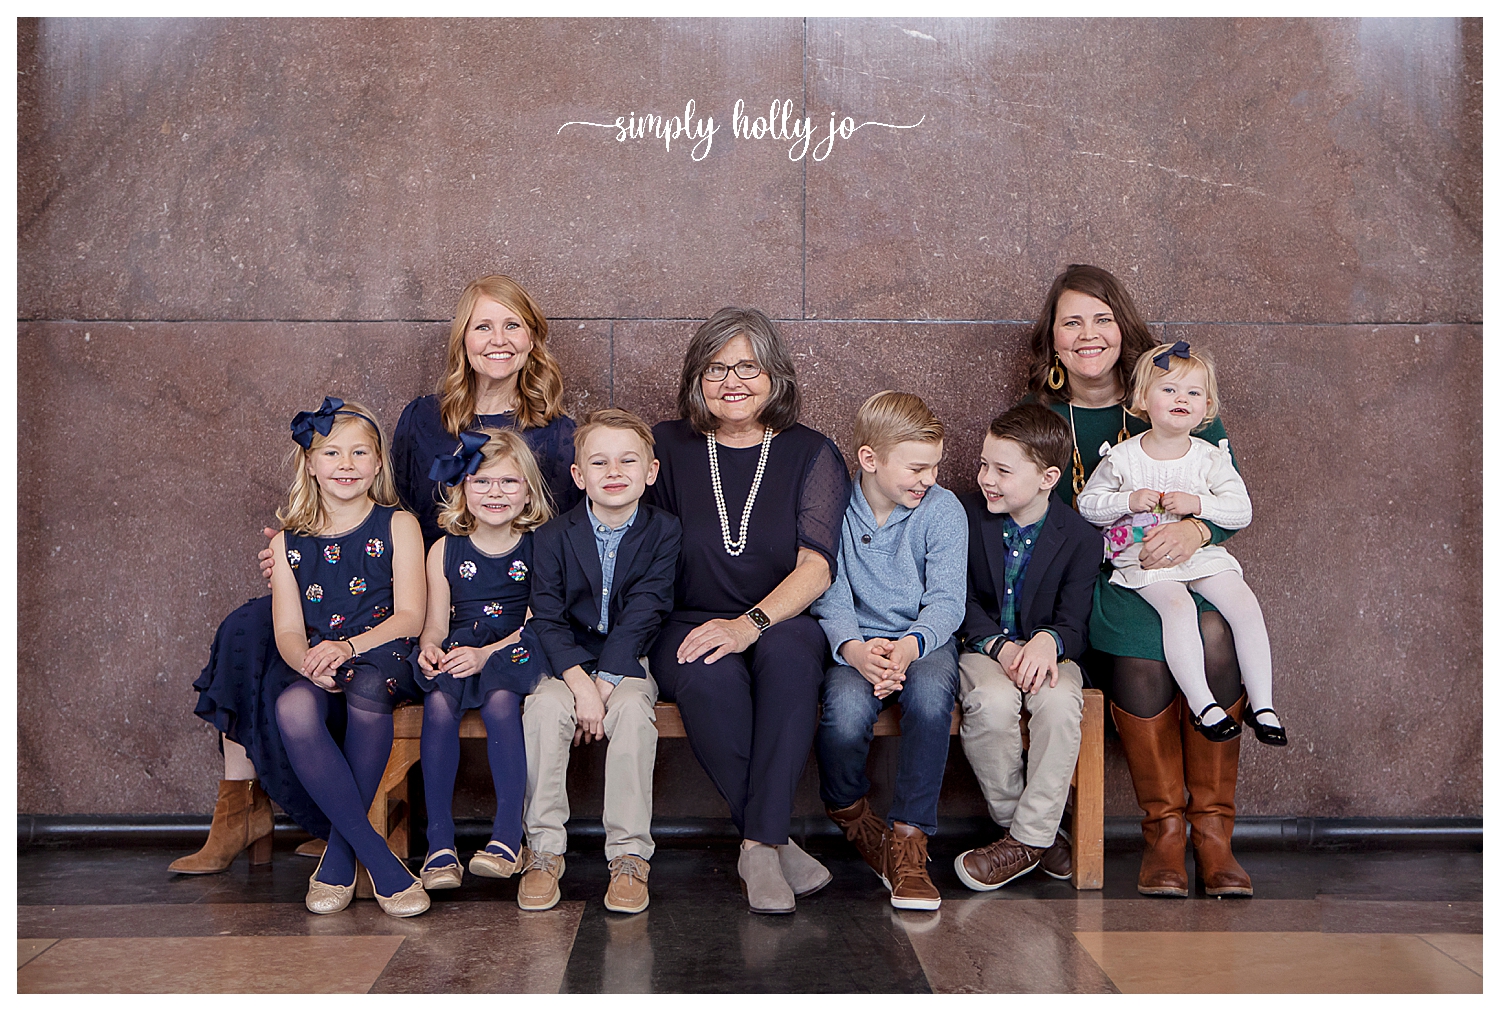 Union Station Family Session | Extended Family Fun